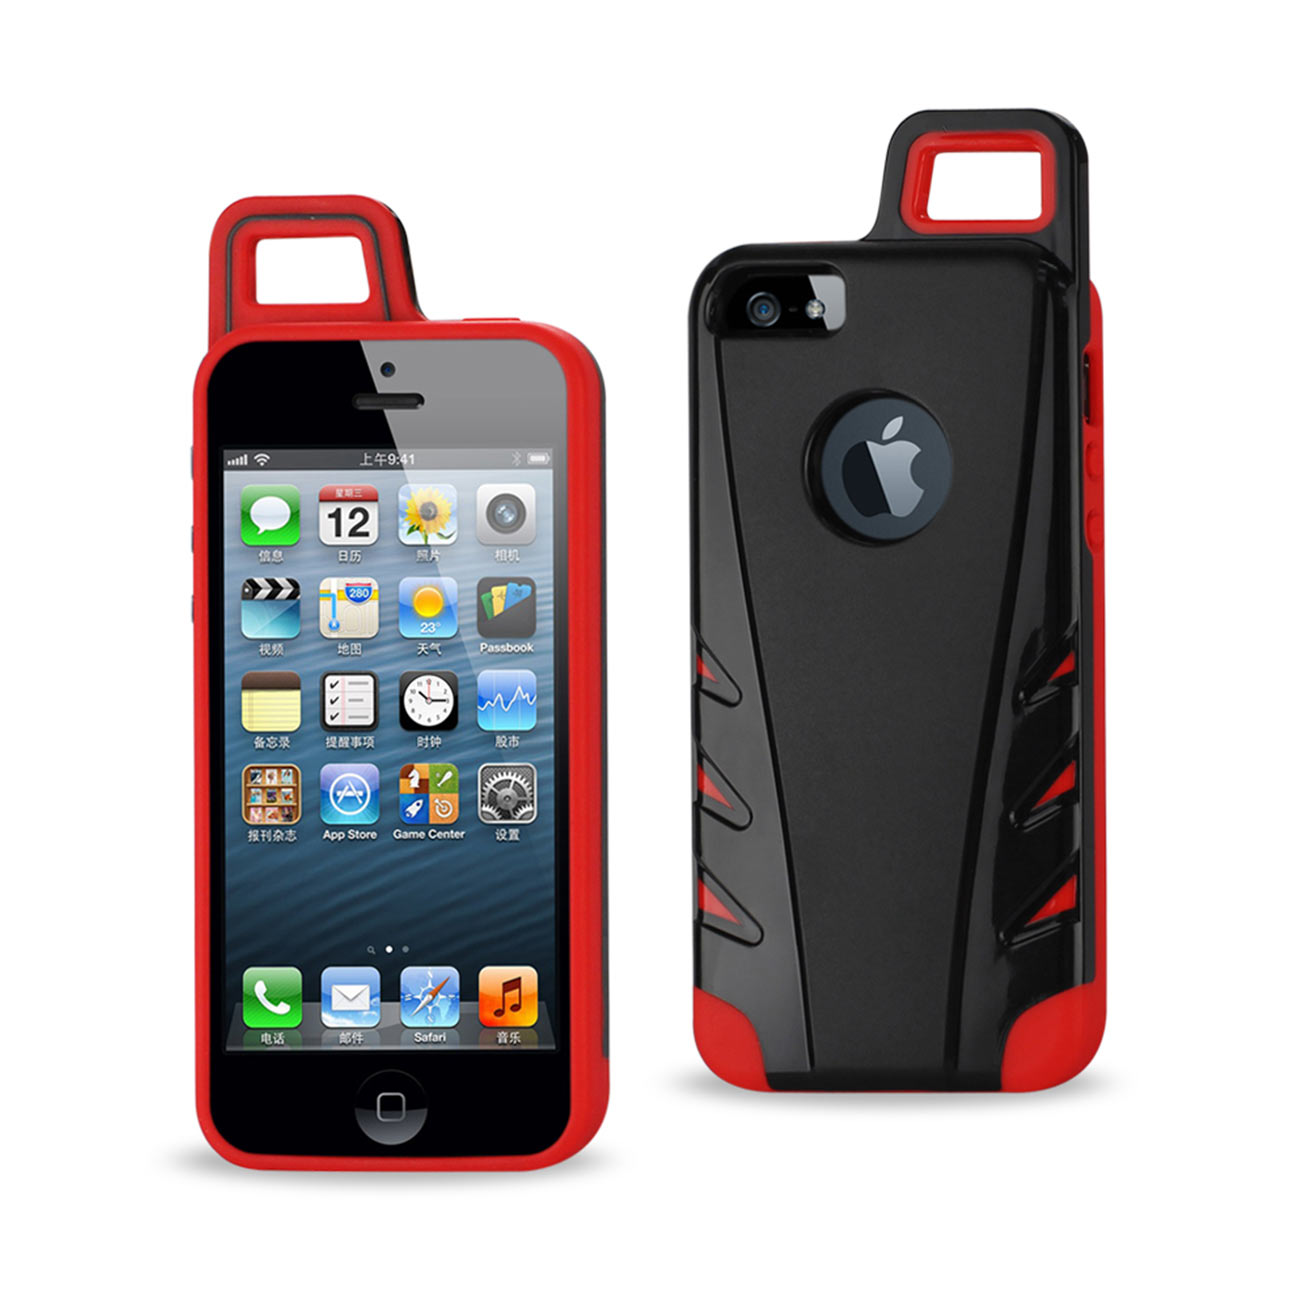 Case Hybrid Drop Proof Workout With Hook iPhone 5/ 5S/ SE Black Red Color